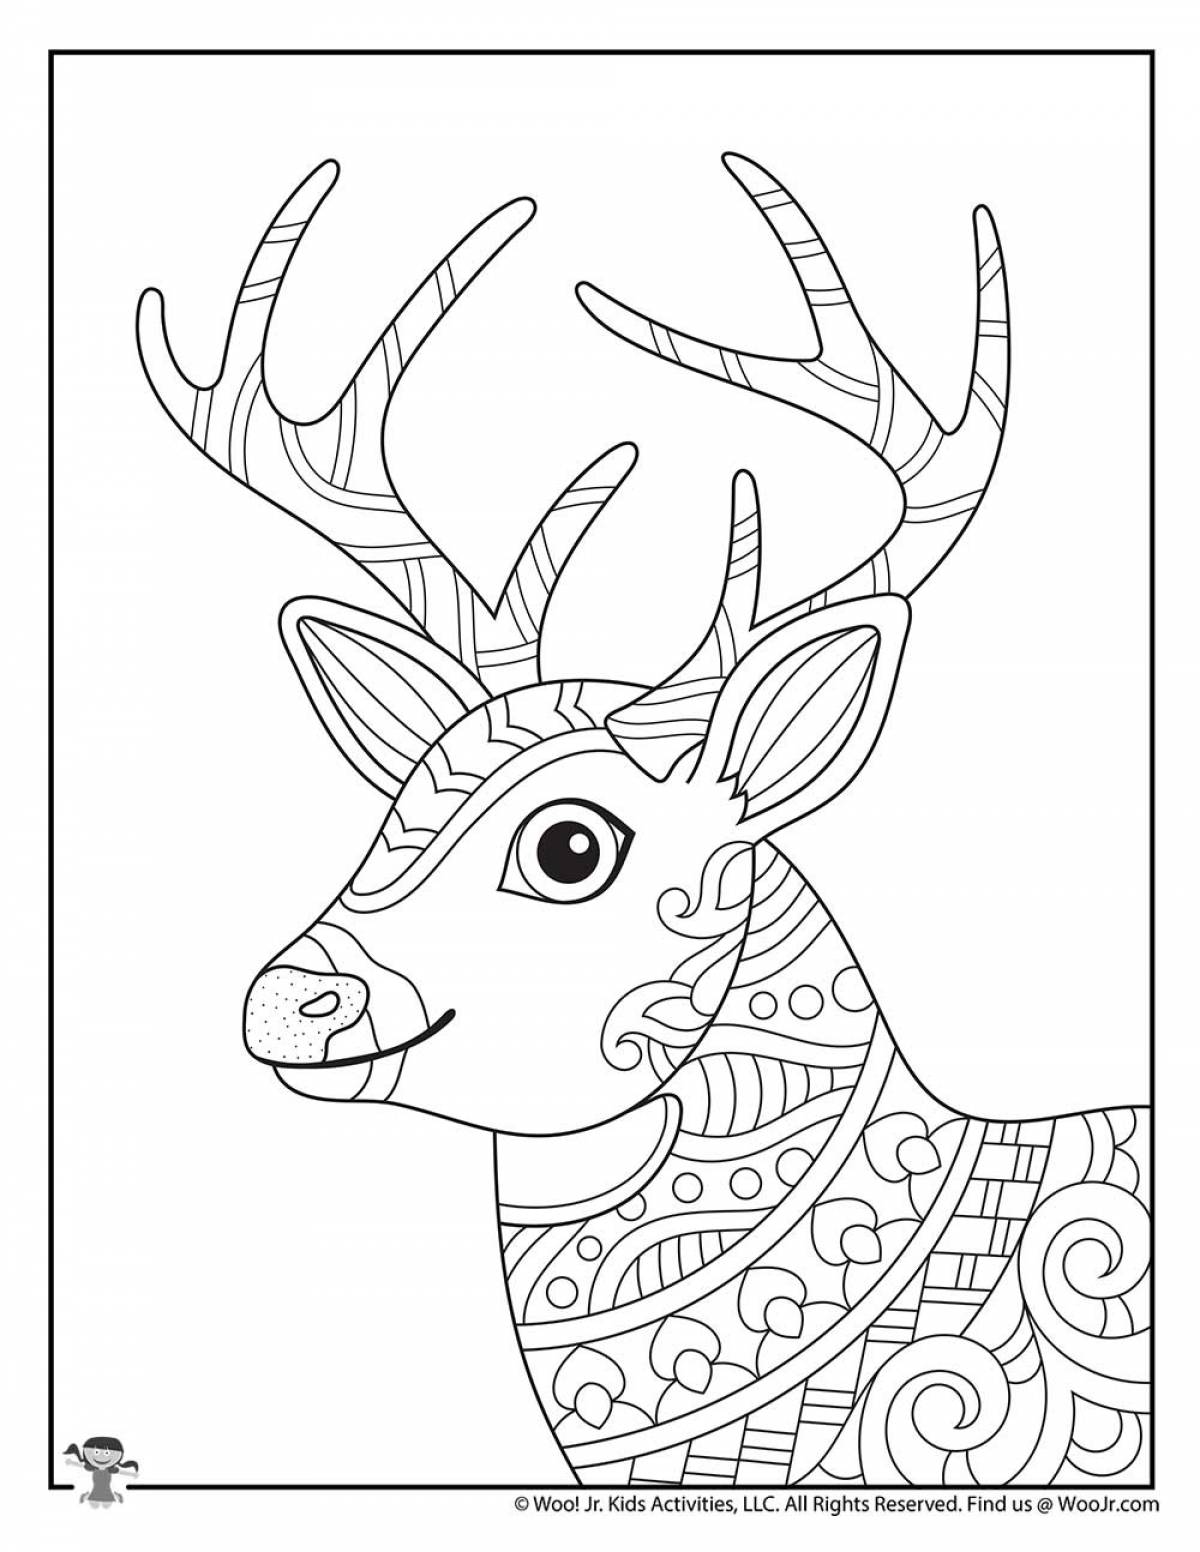 Serene deer coloring book for children 6-7 years old